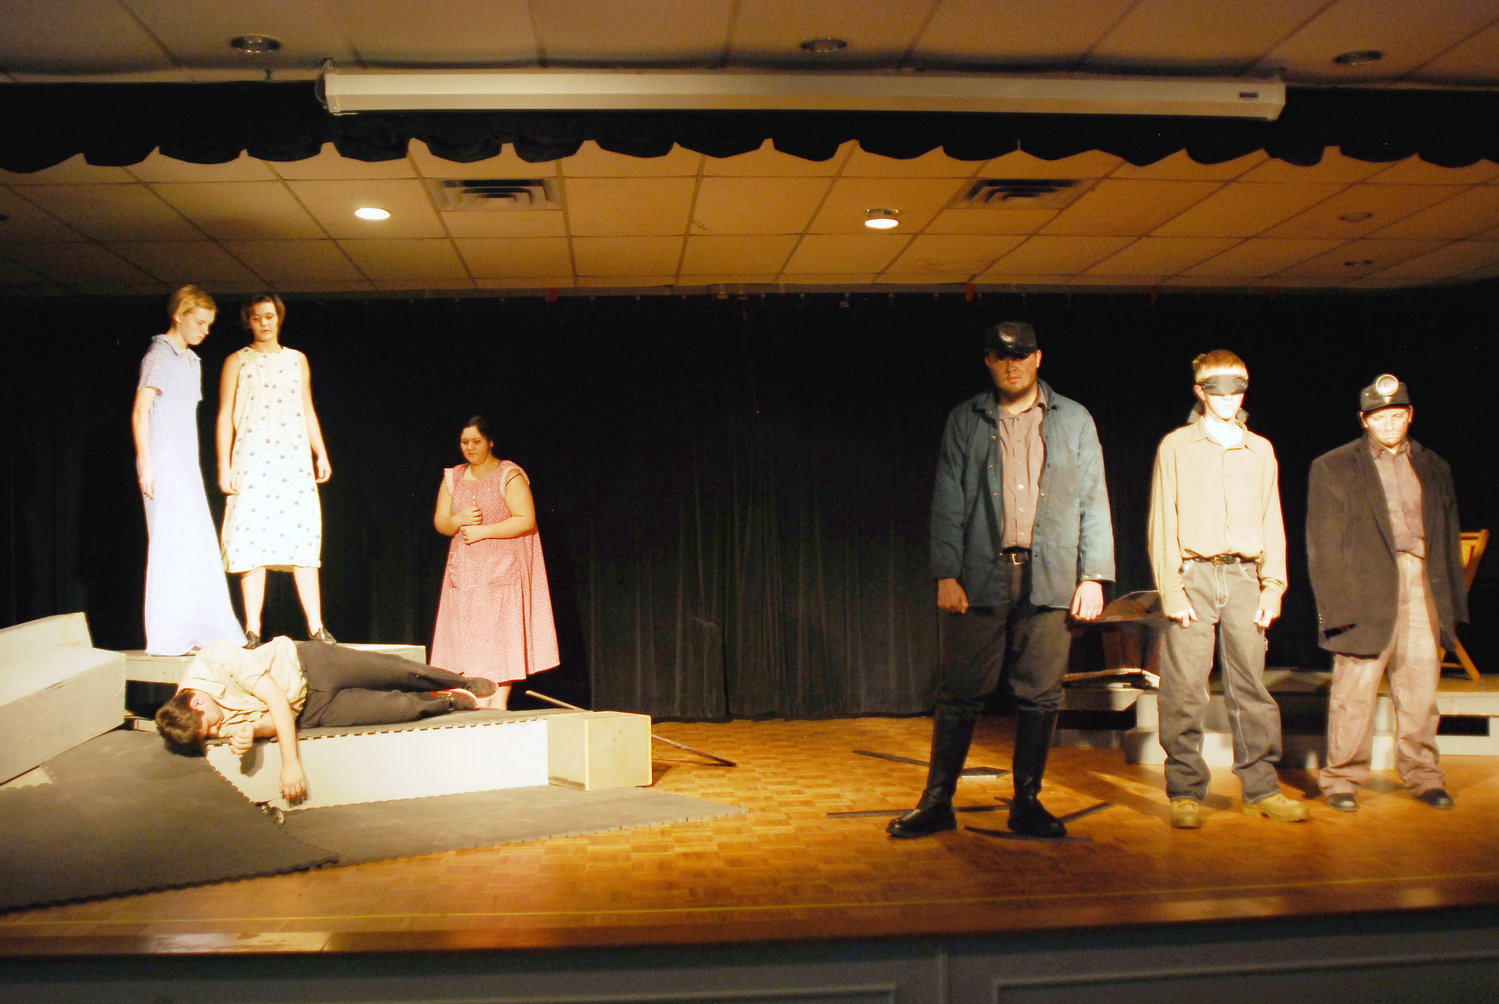 Yantis High School will compete at the UIL Area One Act Play contest with the production of “Digging Up the Boys” by Laura Lundgren Smith on April 1. To help prepare and raise funds for the costs of competition, they will host a dinner theater Thursday. A fried chicken dinner will be served at 6 p.m. with the show at 7 p.m. Admission and meal are for donation only and all proceeds go towards contest expenses.